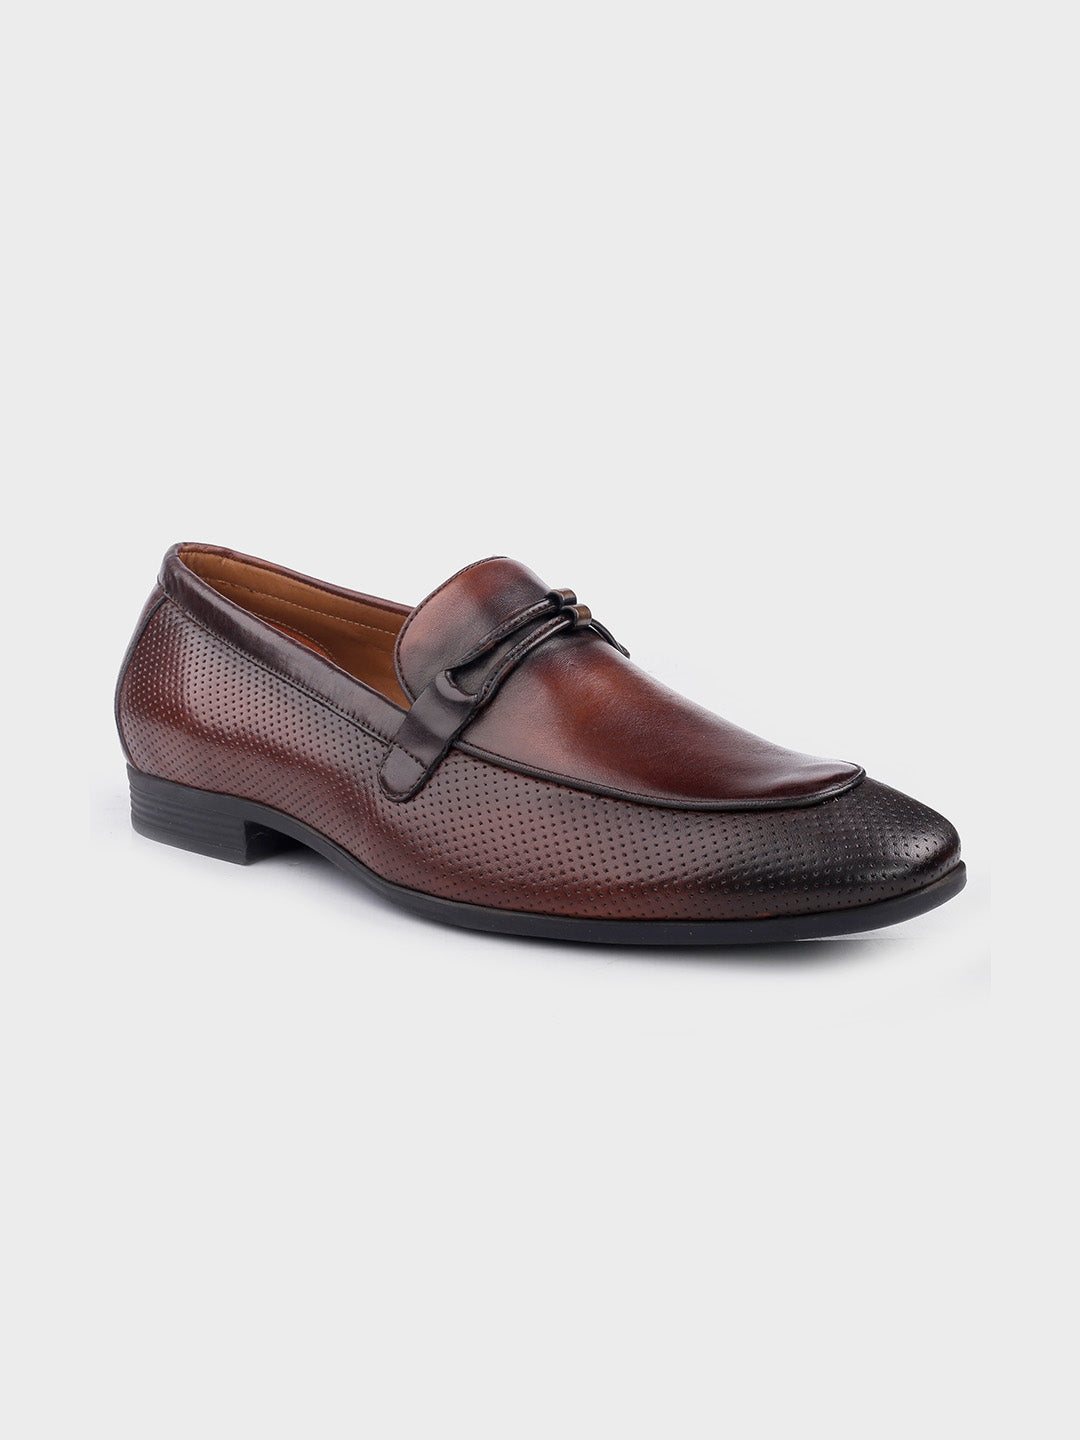 Classic Tan Leather Slip-On Loafers for Men